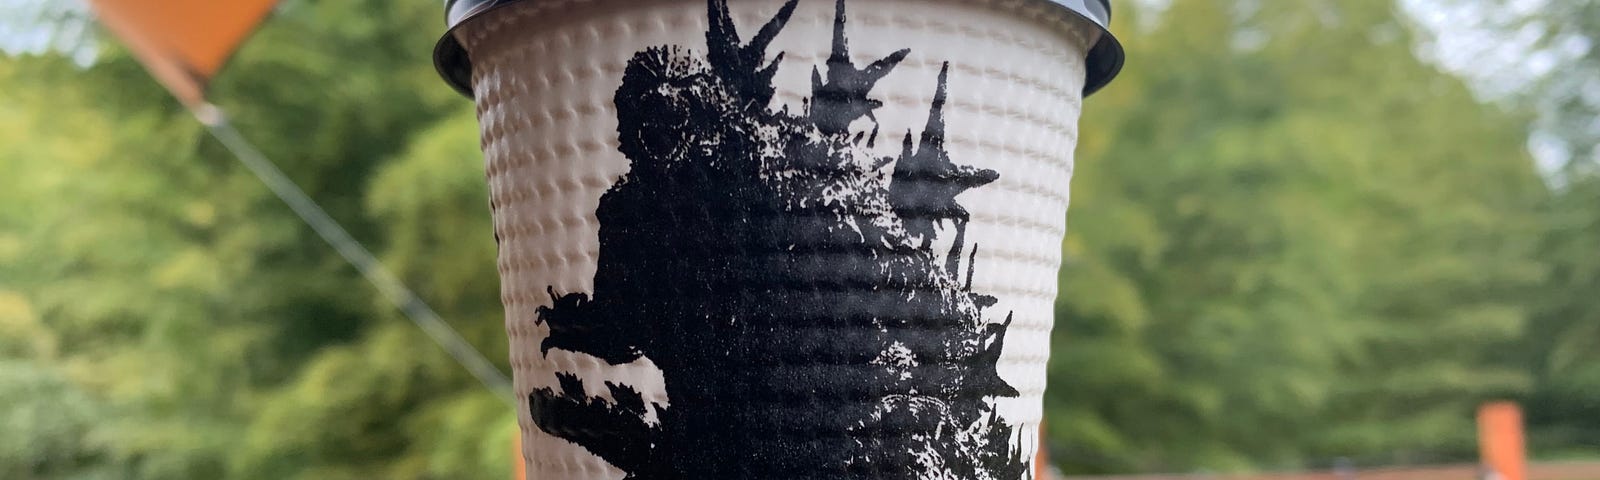 Family Mart Godzilla coffee cup. Photo by Author.